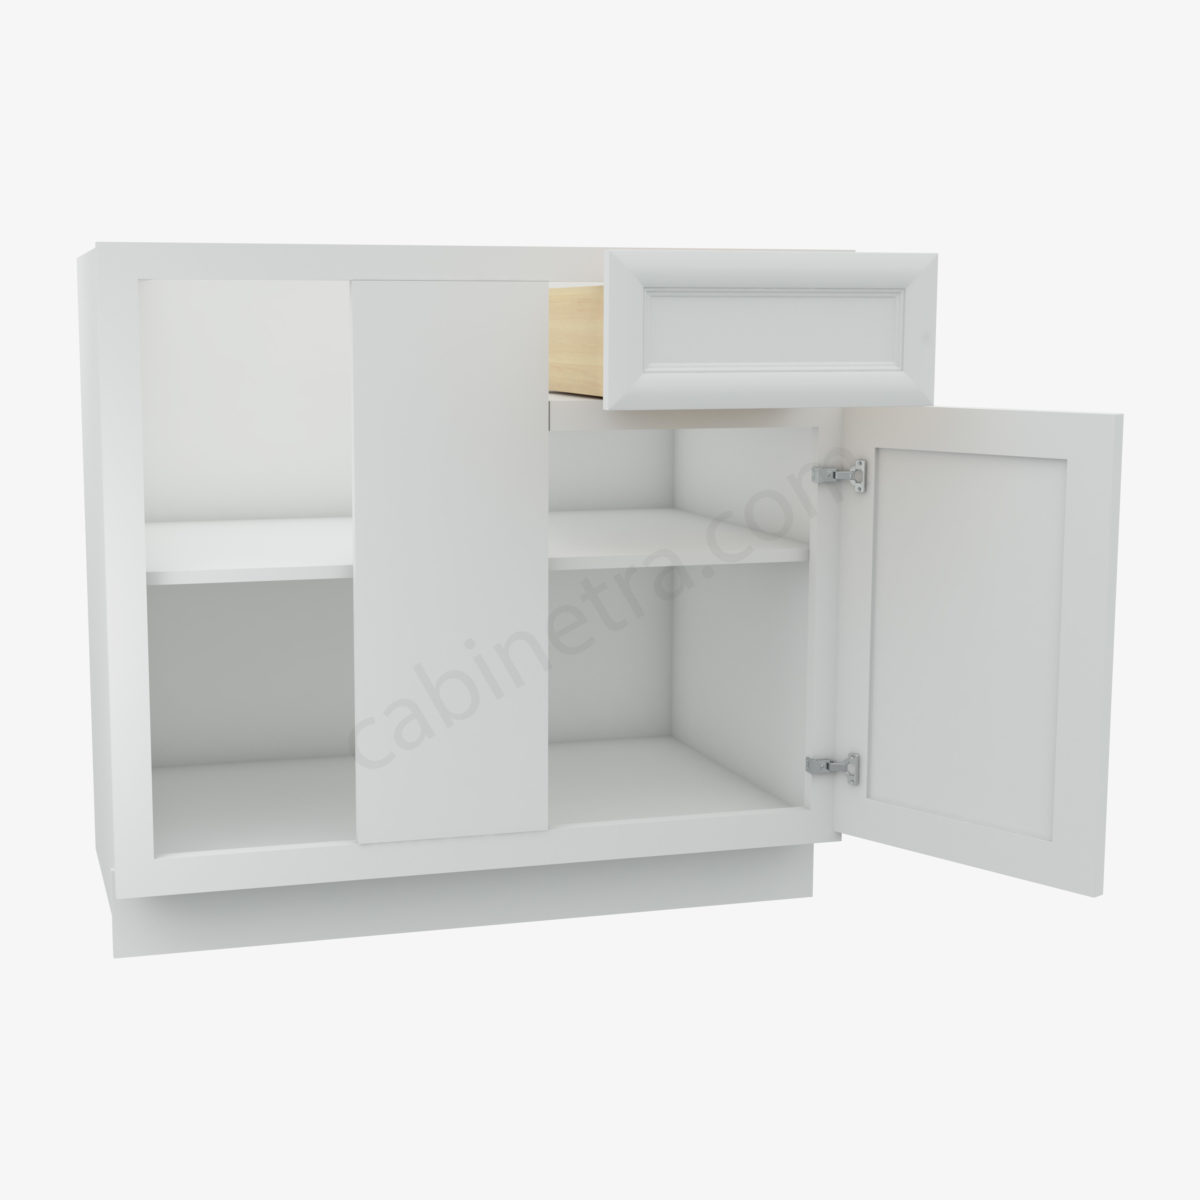 KW BBLC39 42 36W 1  Forevermark K White Cabinetra scaled